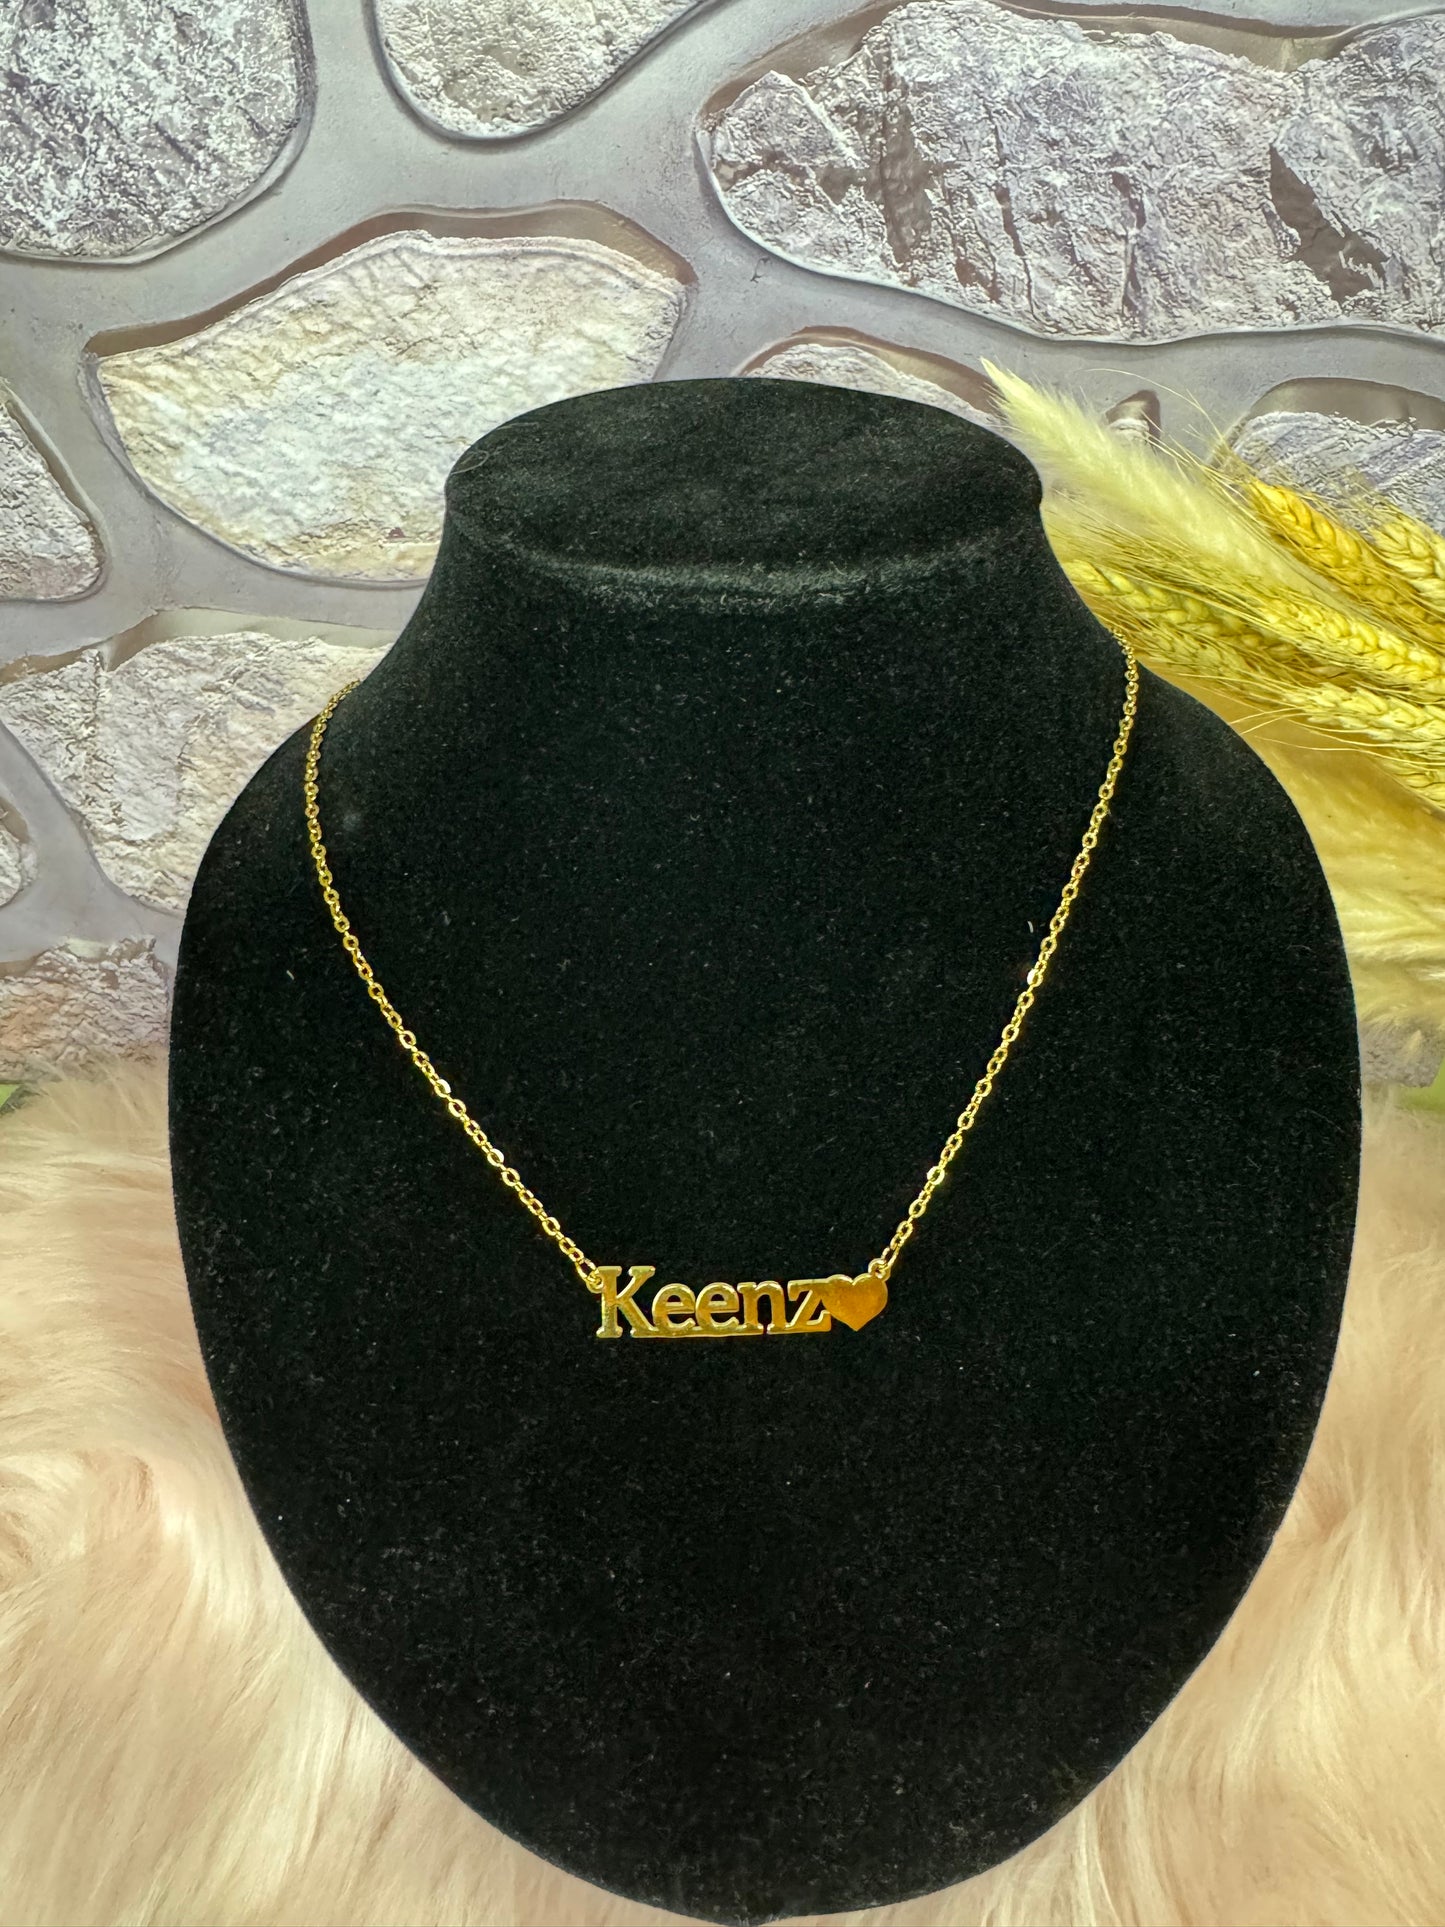 Keenz instock name necklace - stainless steel gold plated